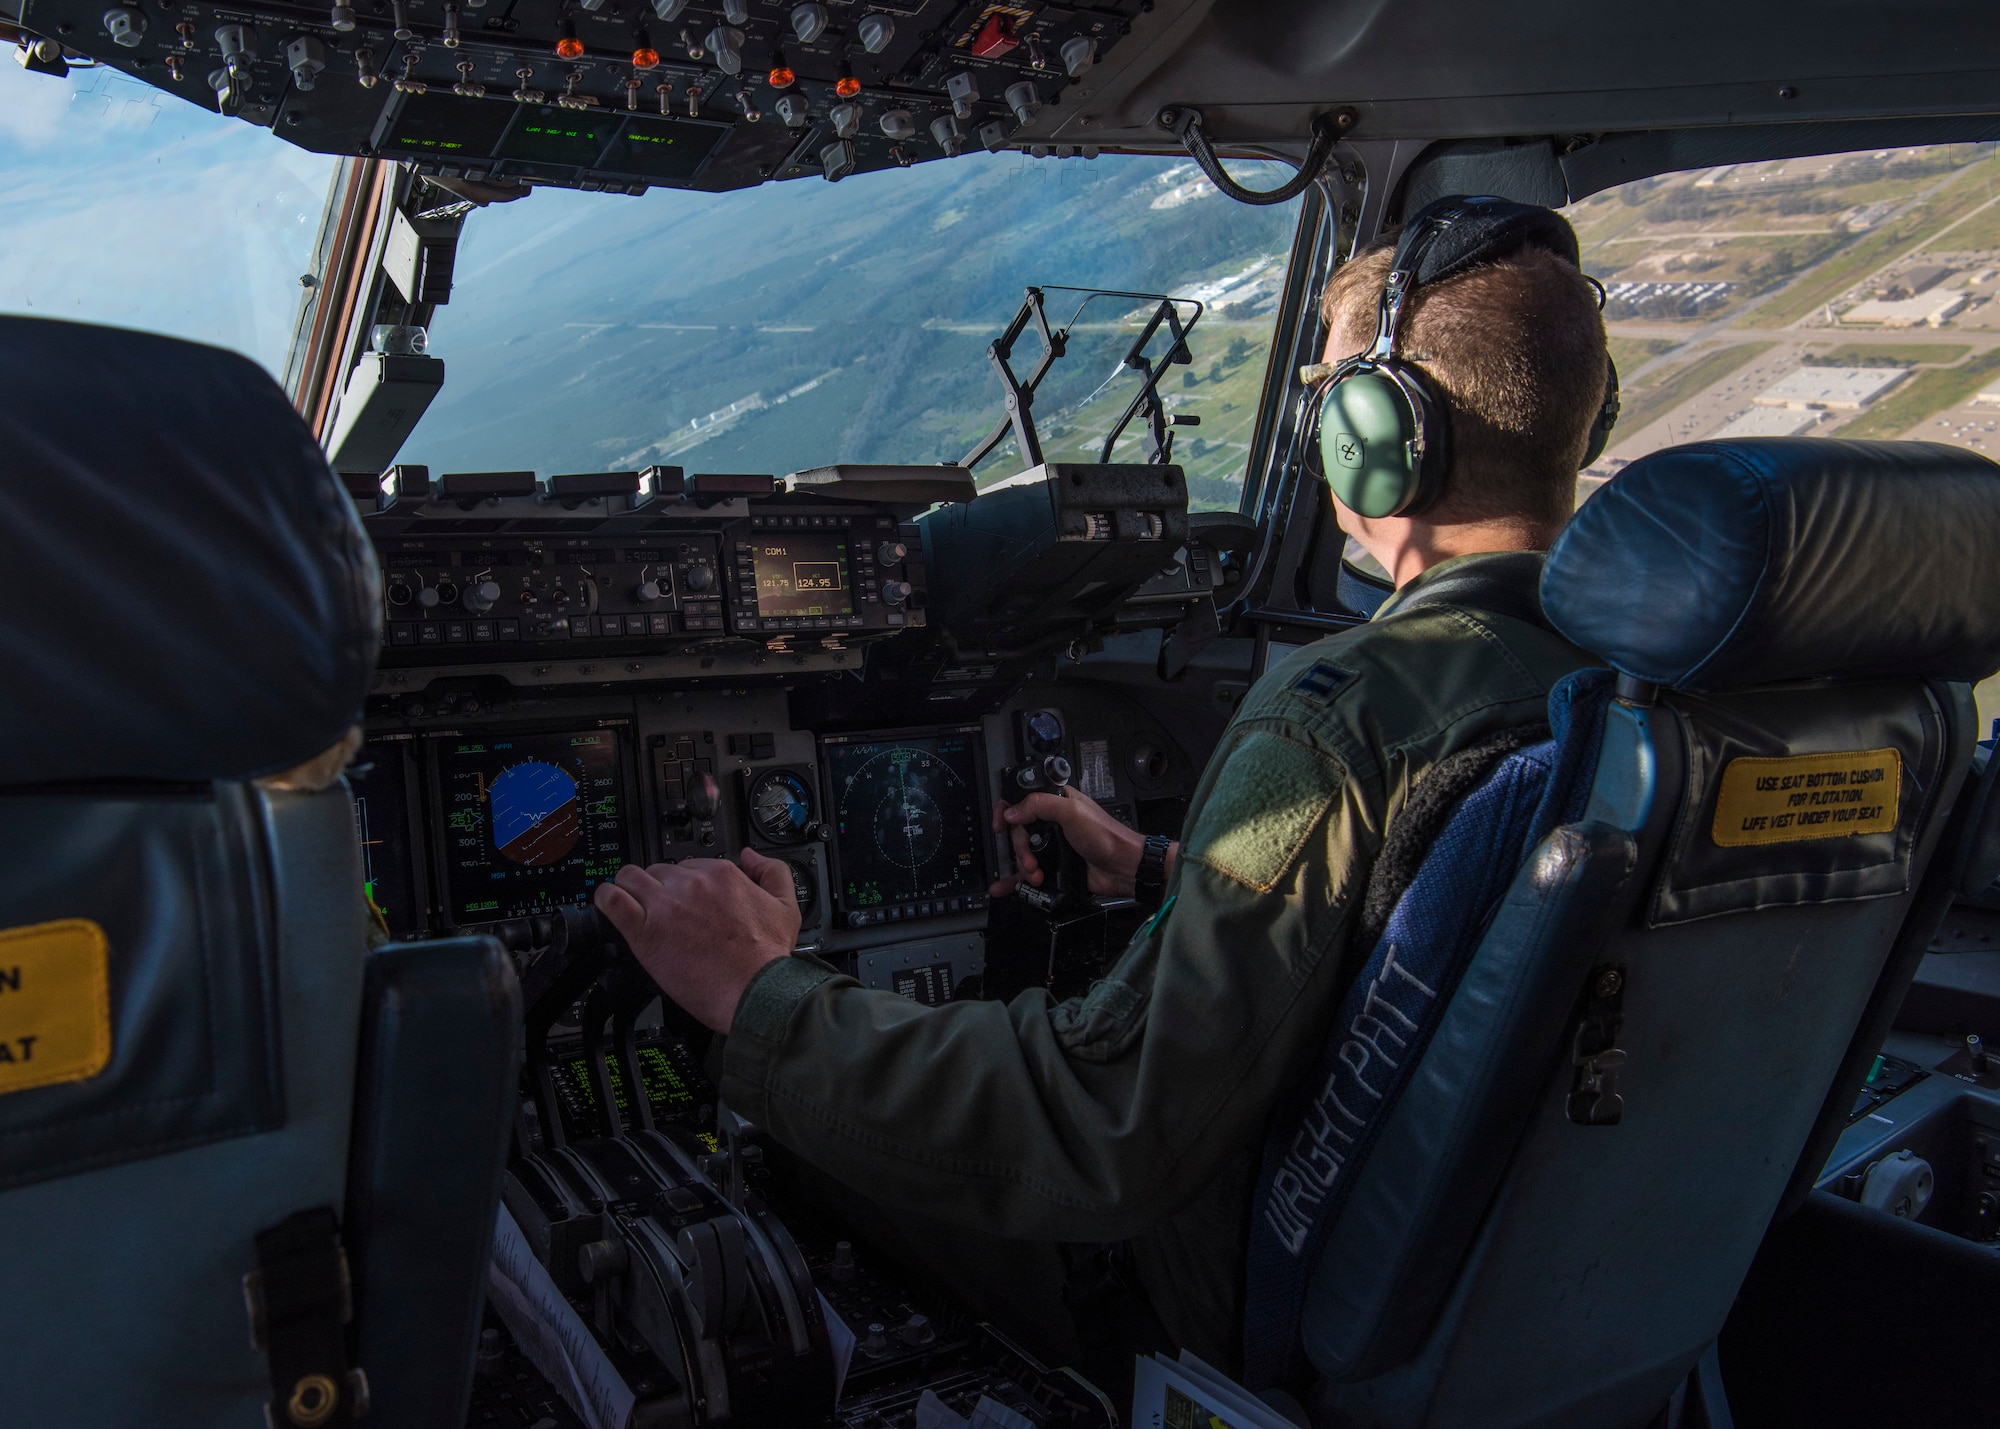 Capt. Jeremiah Brown, 89th Airlift Squadron pilot, operates a C-17 Globemaster III, assigned to Wright-Patterson Air Force Base, Ohio, during Exercise Patriot Hook 2019, April 11, 2019, at Vandenberg Air Force Base, Calif. The C-17 is the most flexible cargo aircraft to enter the airlift force and is capable of rapid strategic delivery of troops and cargo to main operating bases or directly to forward bases. (U.S. Air Force photo by Airman 1st Class Aubree Milks)